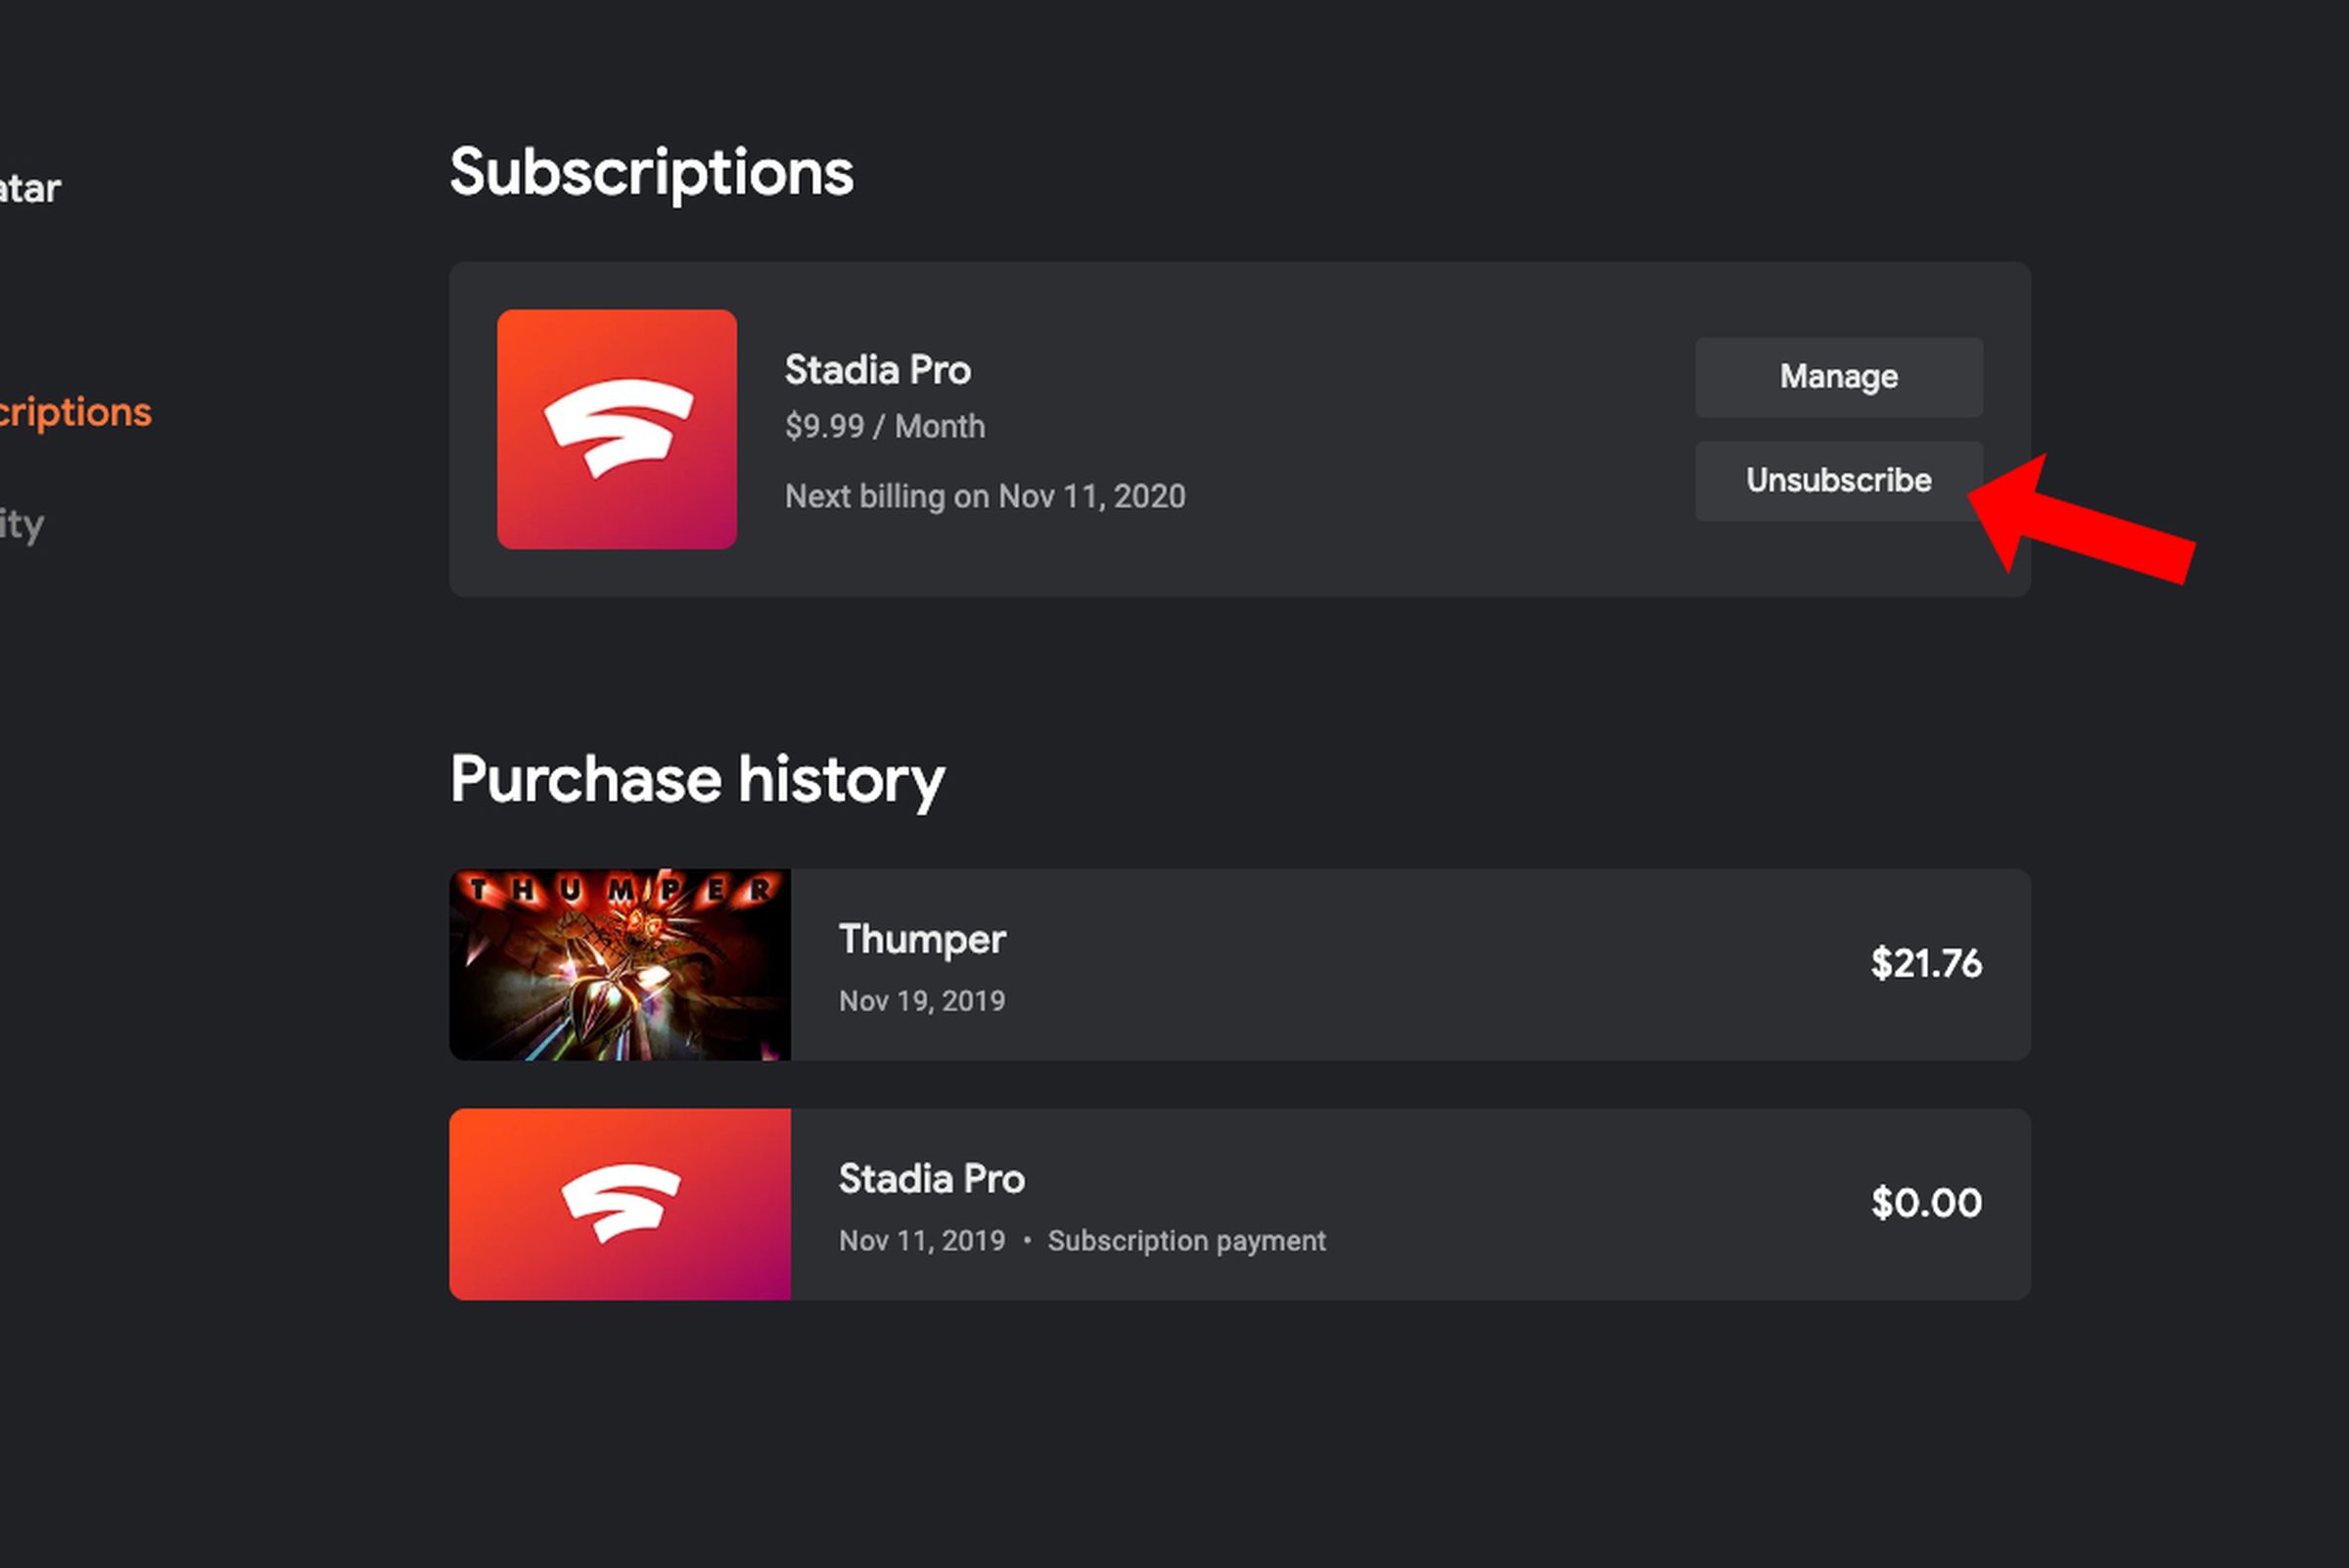 The Purchases & subscriptions view for a Stadia Pro member, highlighting the Unsubscribe button. 